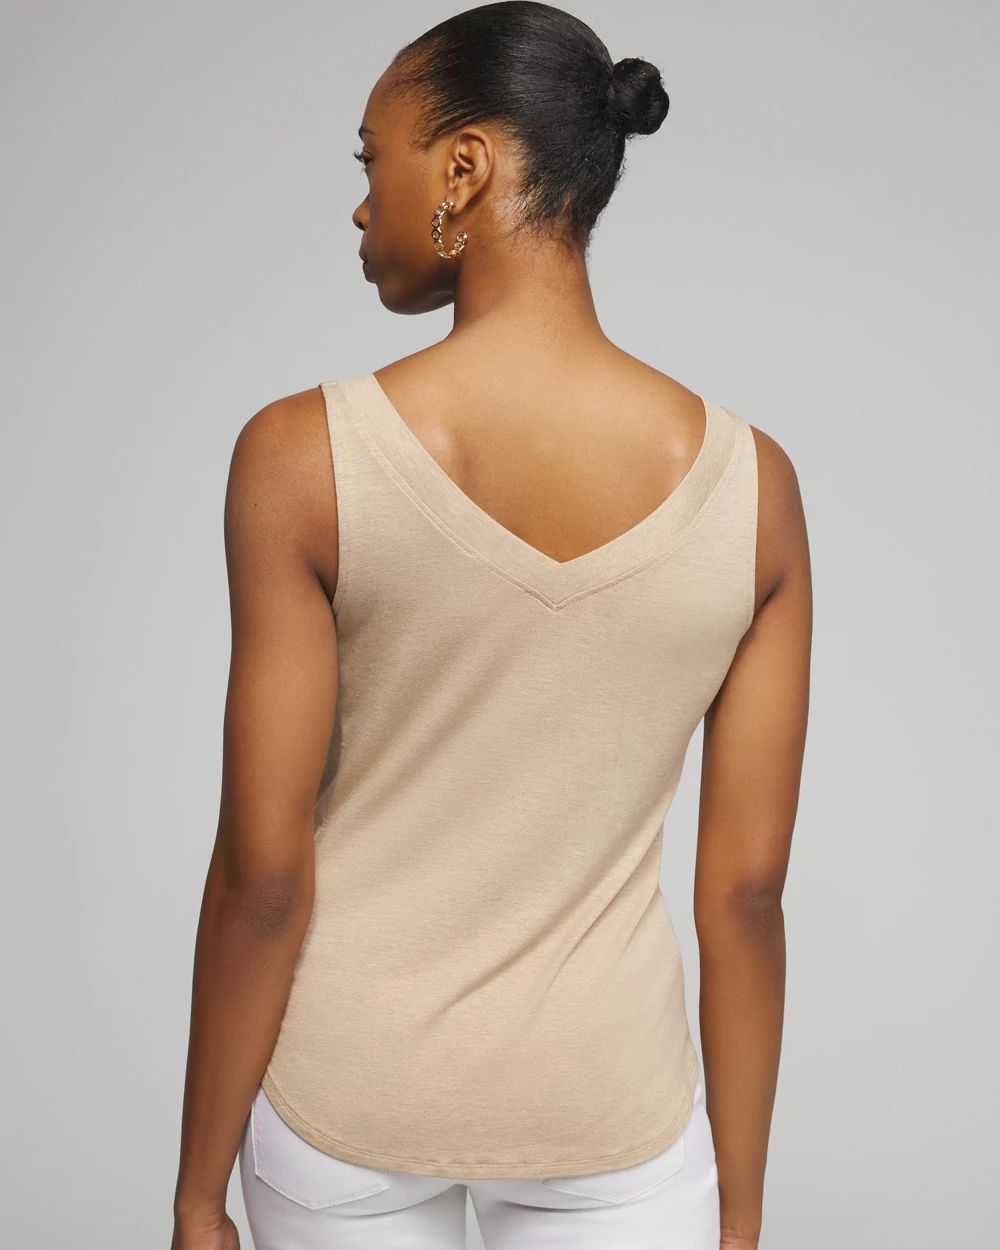 Outlet WHBM Sleeveless Double V-Neck Tank click to view larger image.